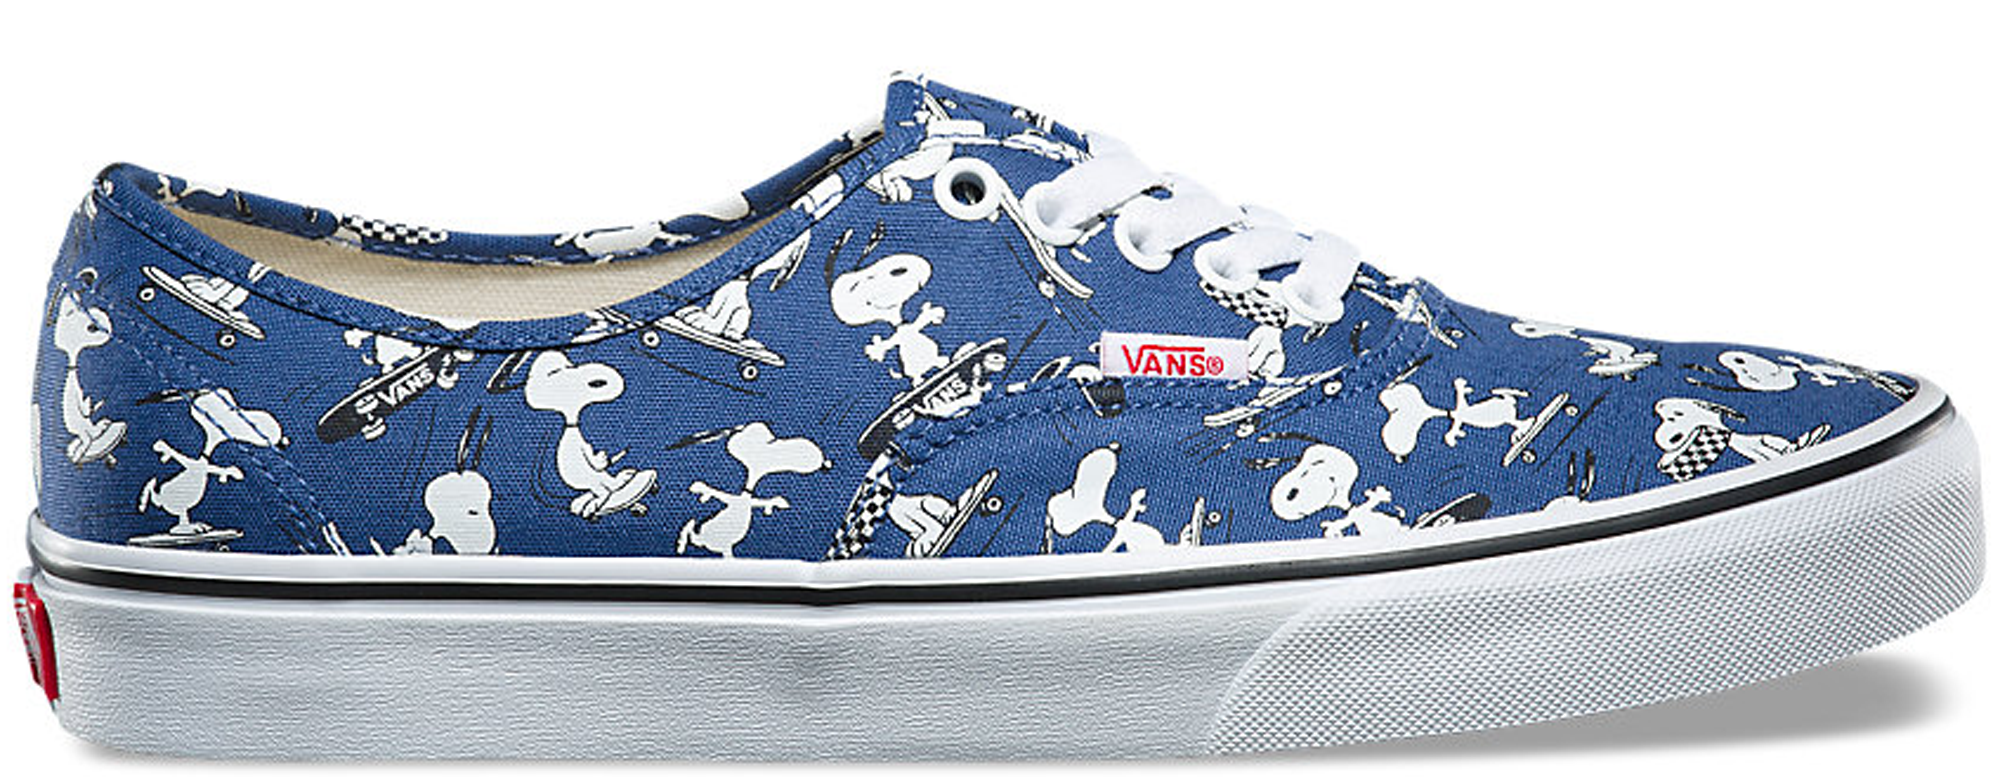 vans x peanuts authentic snoopy skate shoes